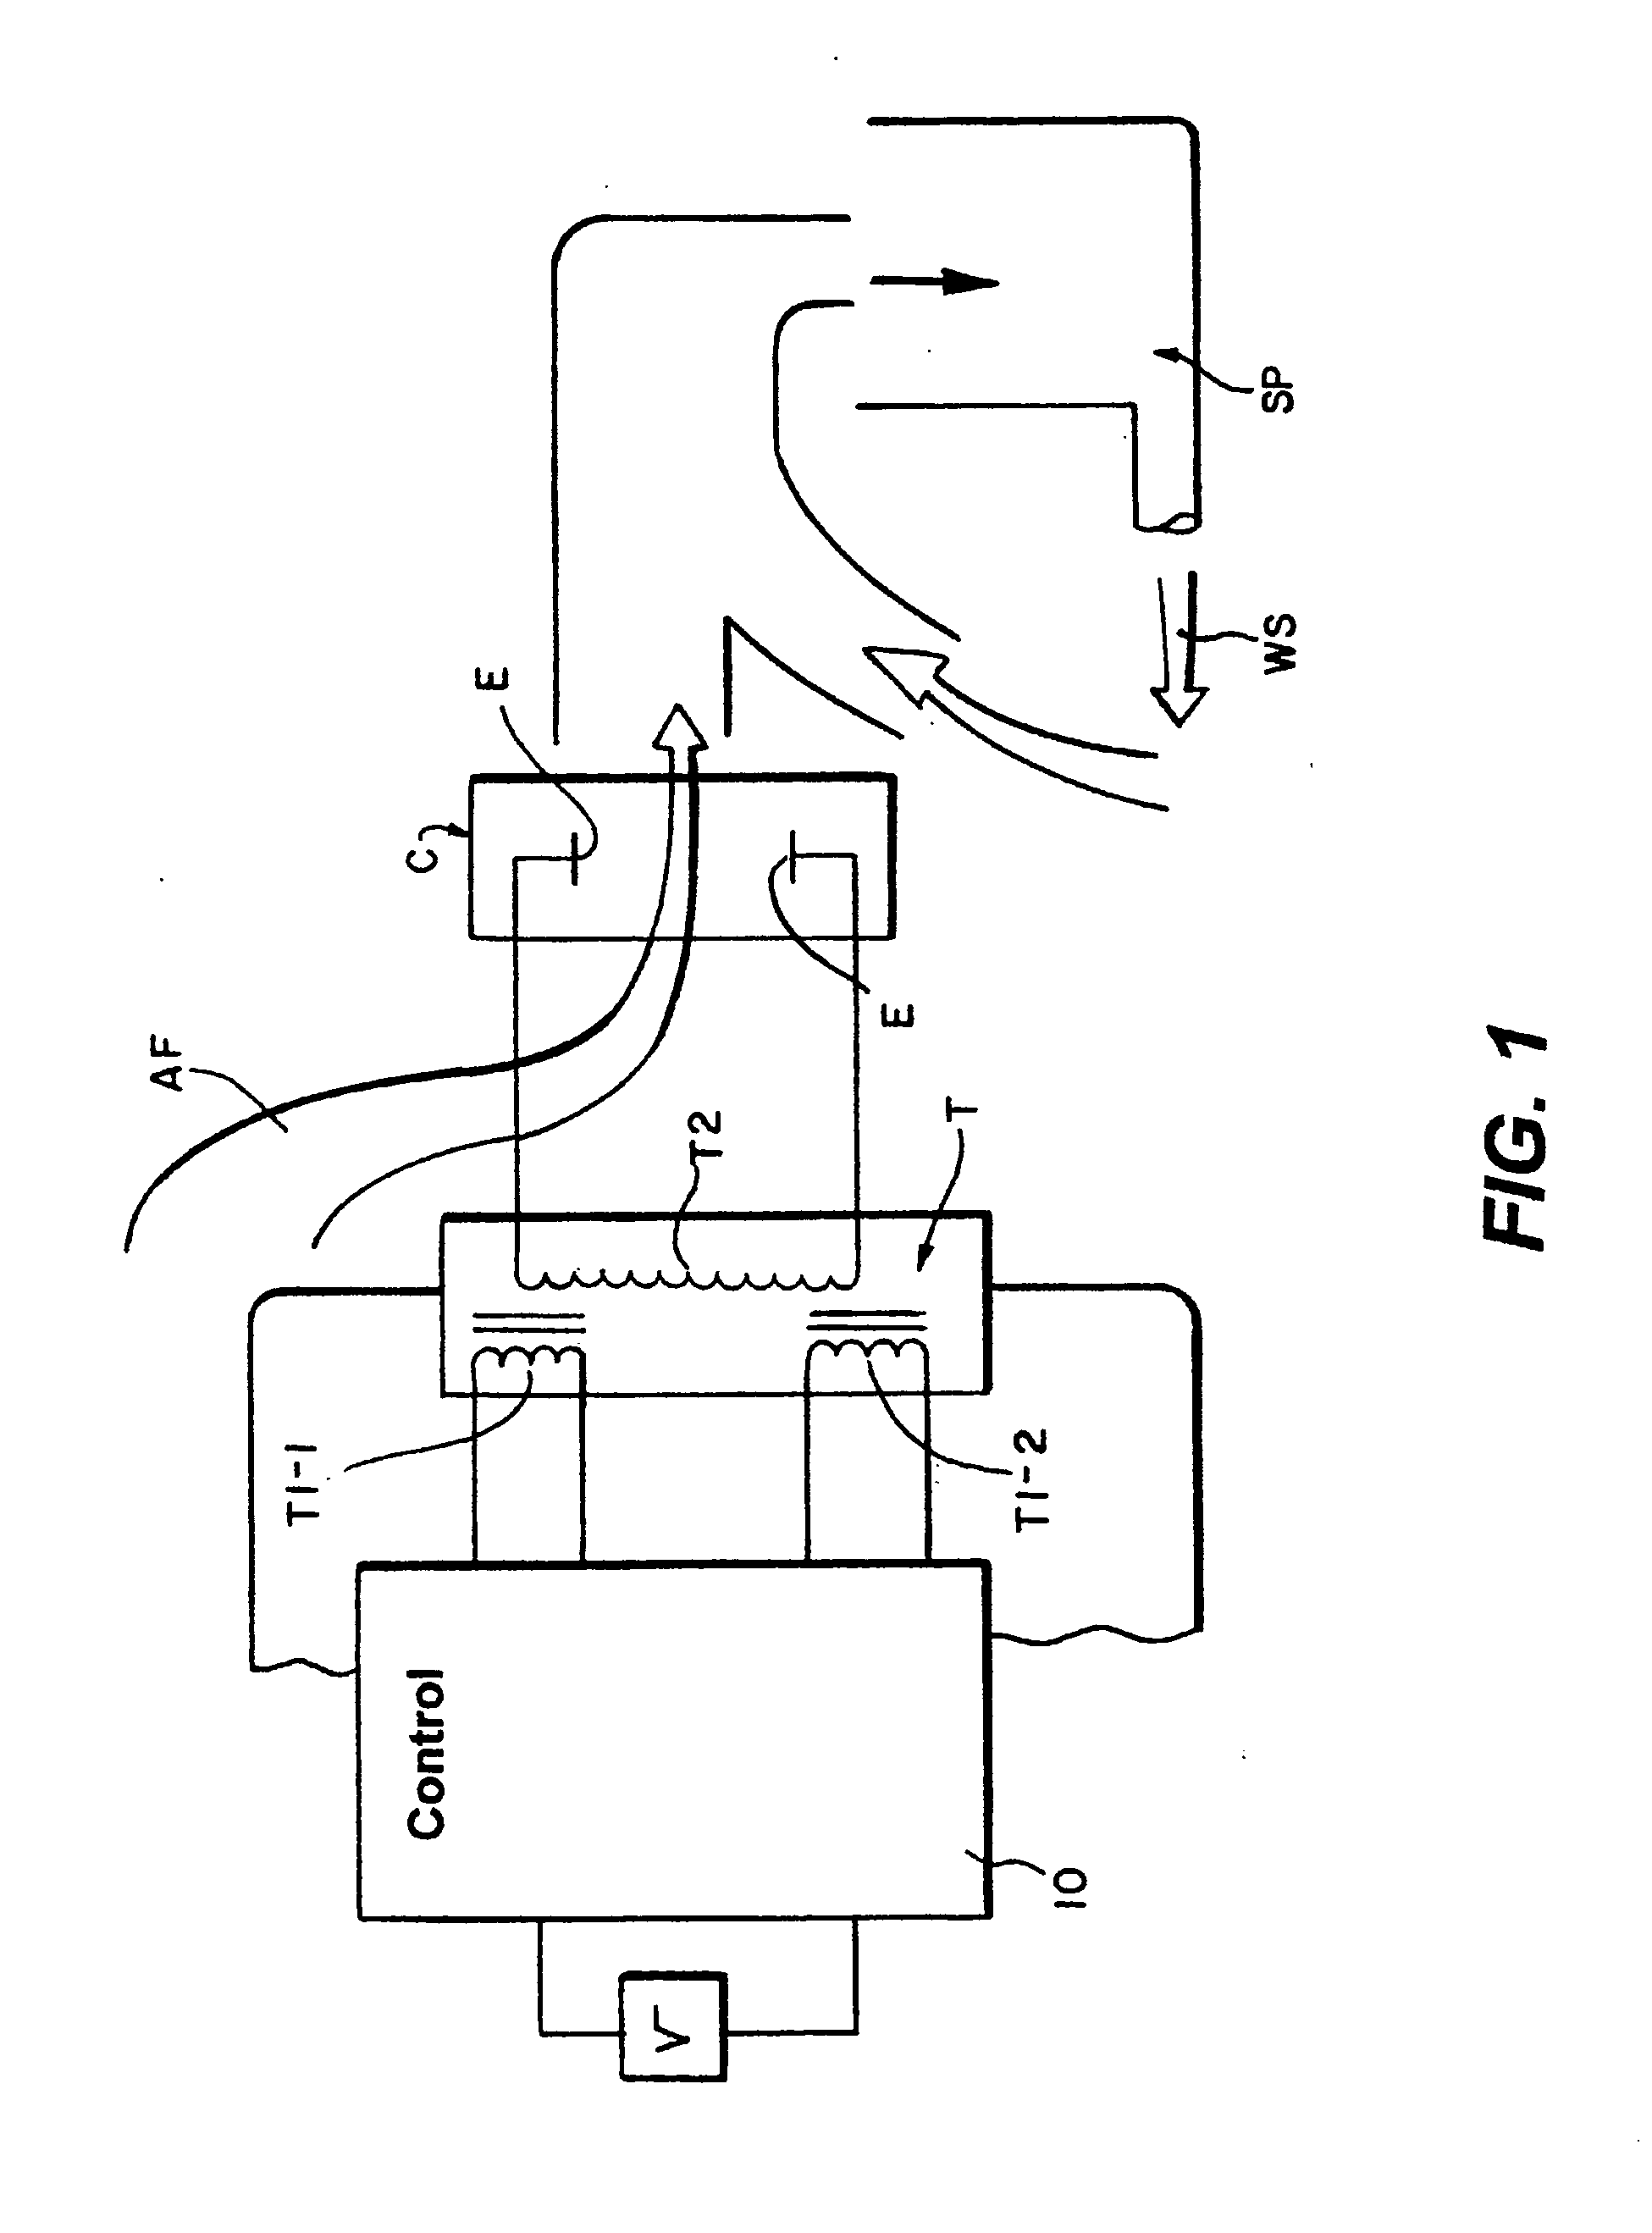 Apparatus for confinement of the short-lived hydroxyradical OH associated with ozone reaction processes